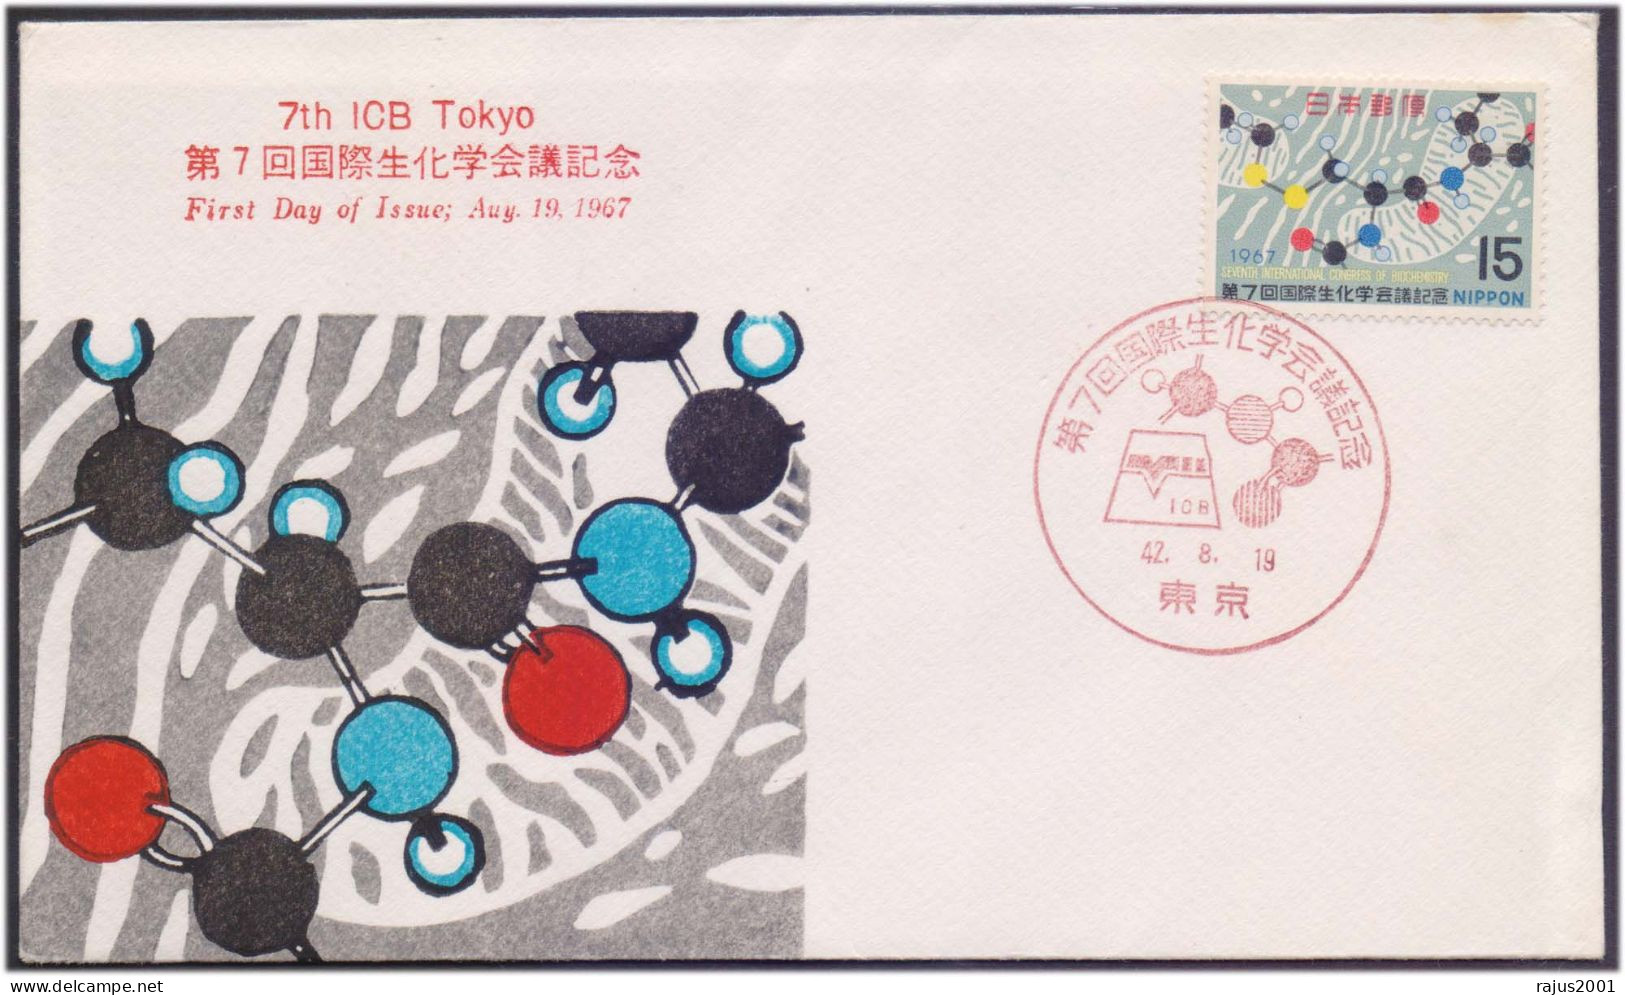 Congress Of Biochemistry, Mitochondria & Part Of Amino Acid Sequence Of A Protein Health, Medicine, Japan 1967 FDC - Geneeskunde